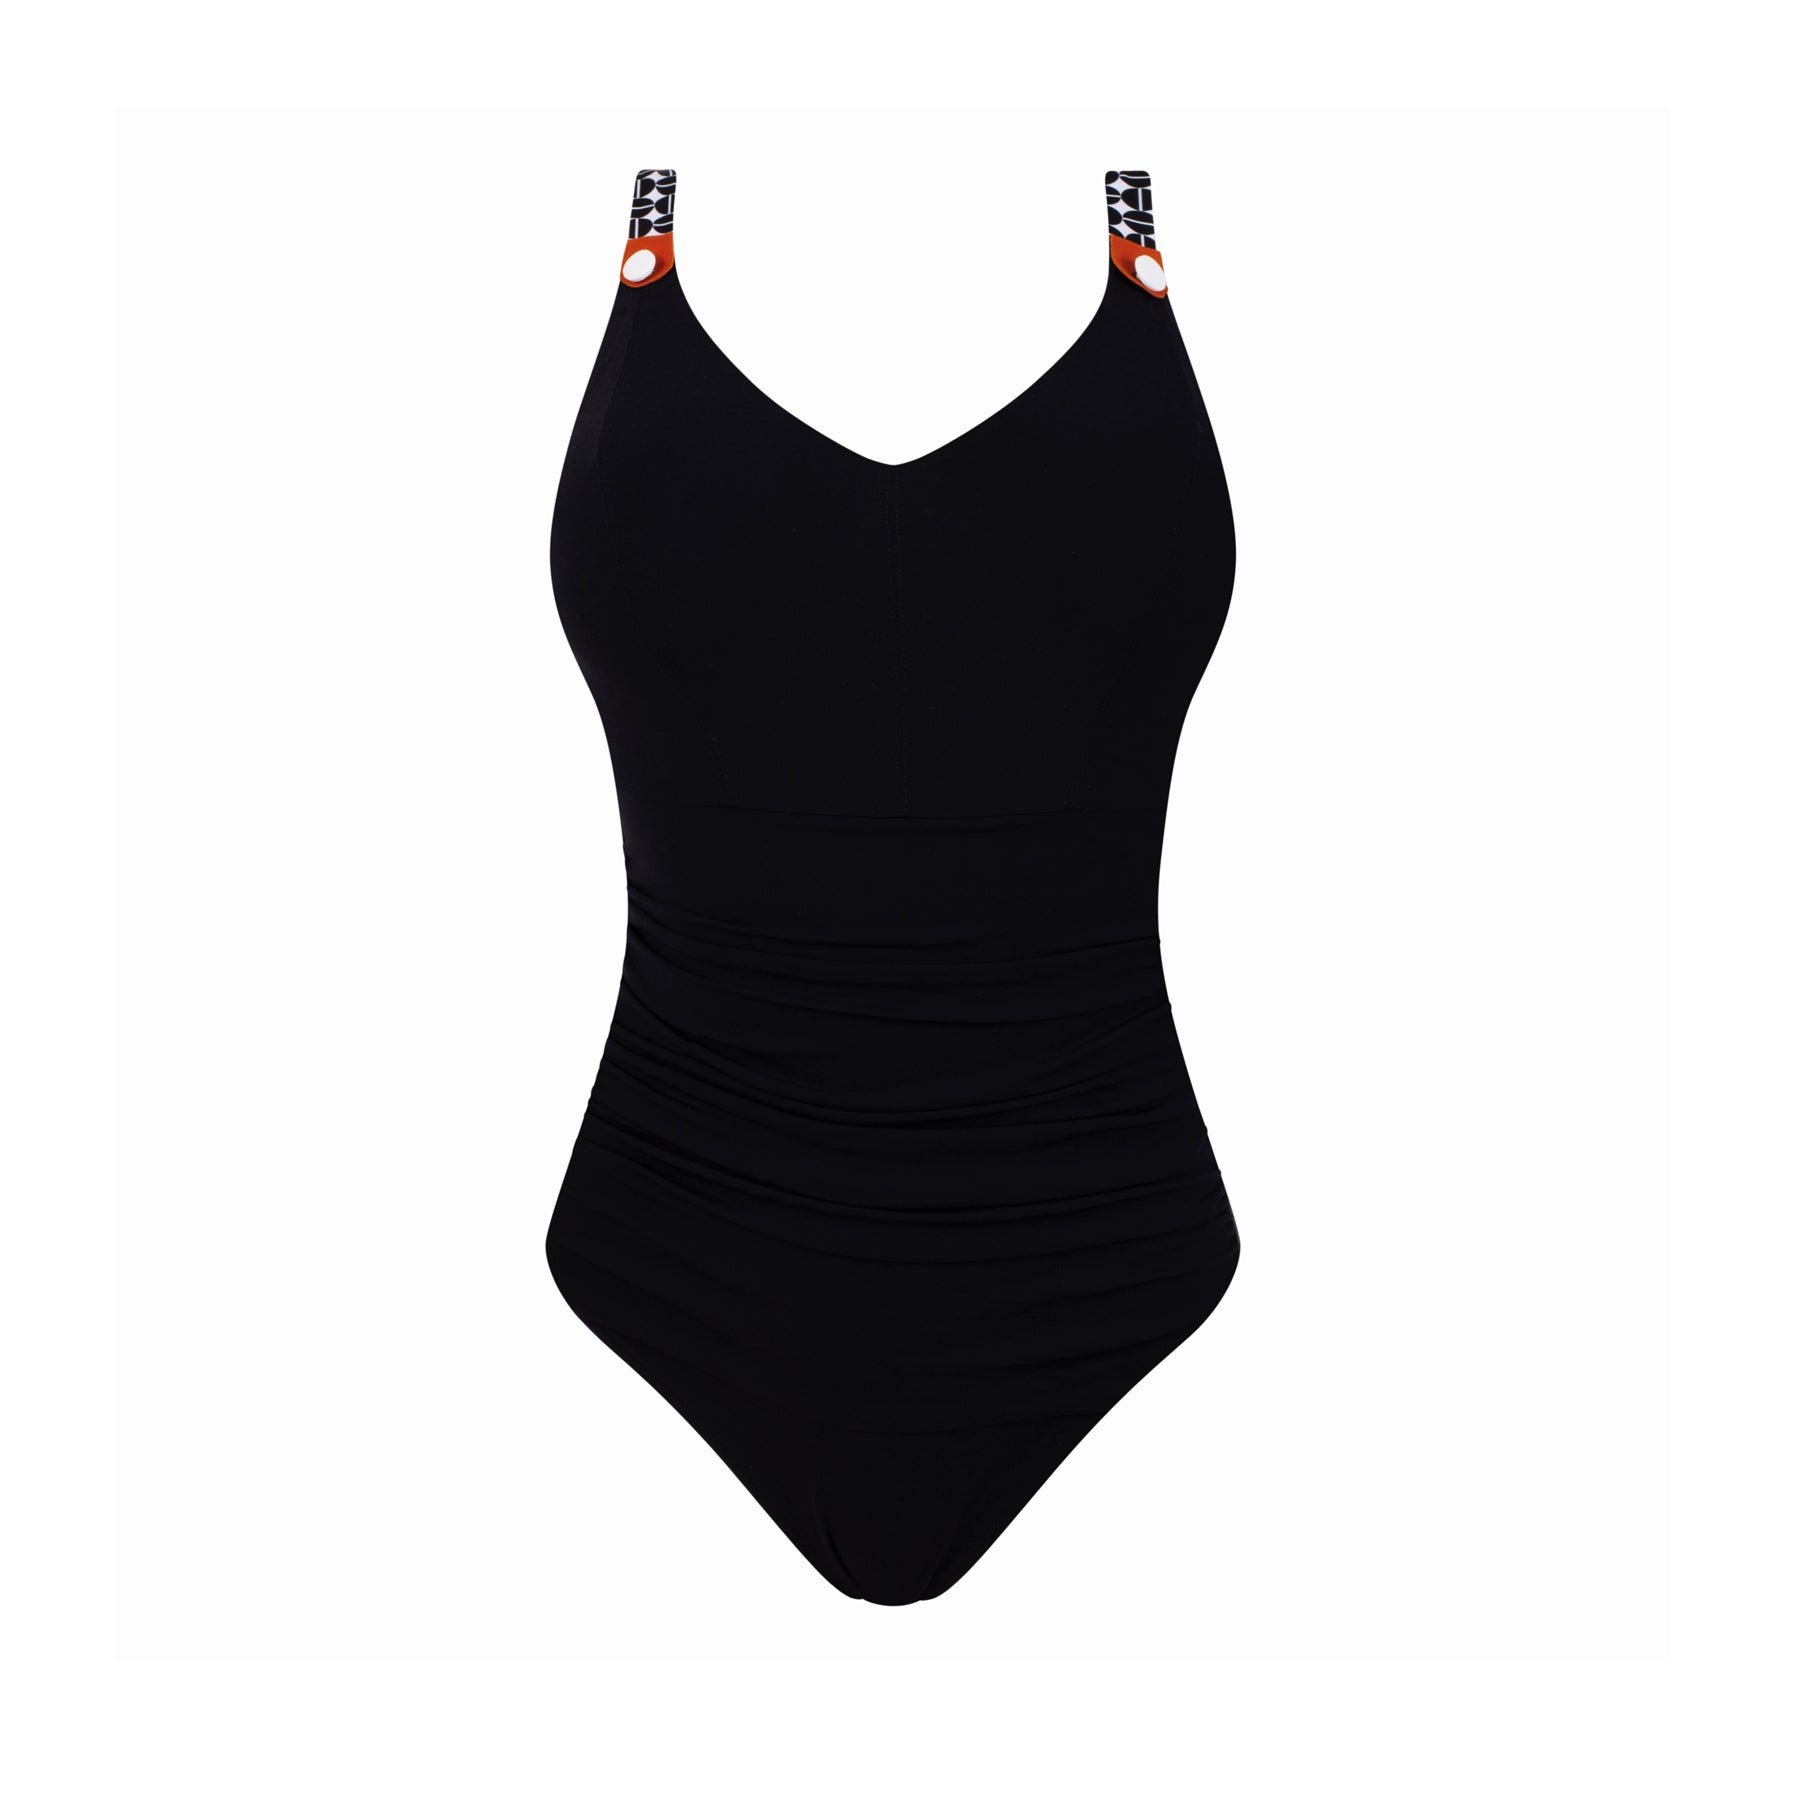 Two-piece swimsuit Carine Gilson Black size M International in Polyester -  10969985